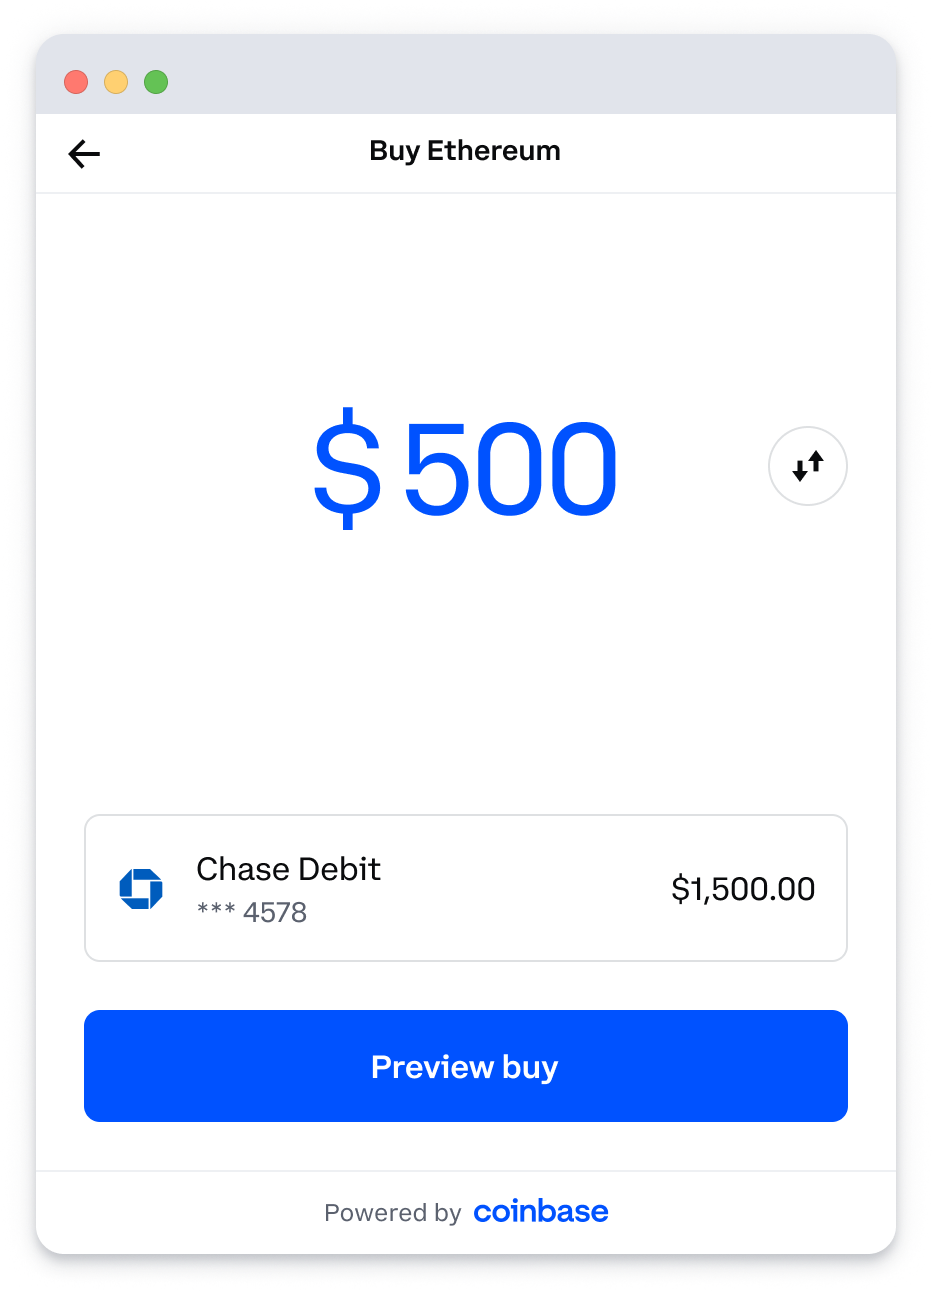 Add an amount and choose a payment method such as a Chase debit card.